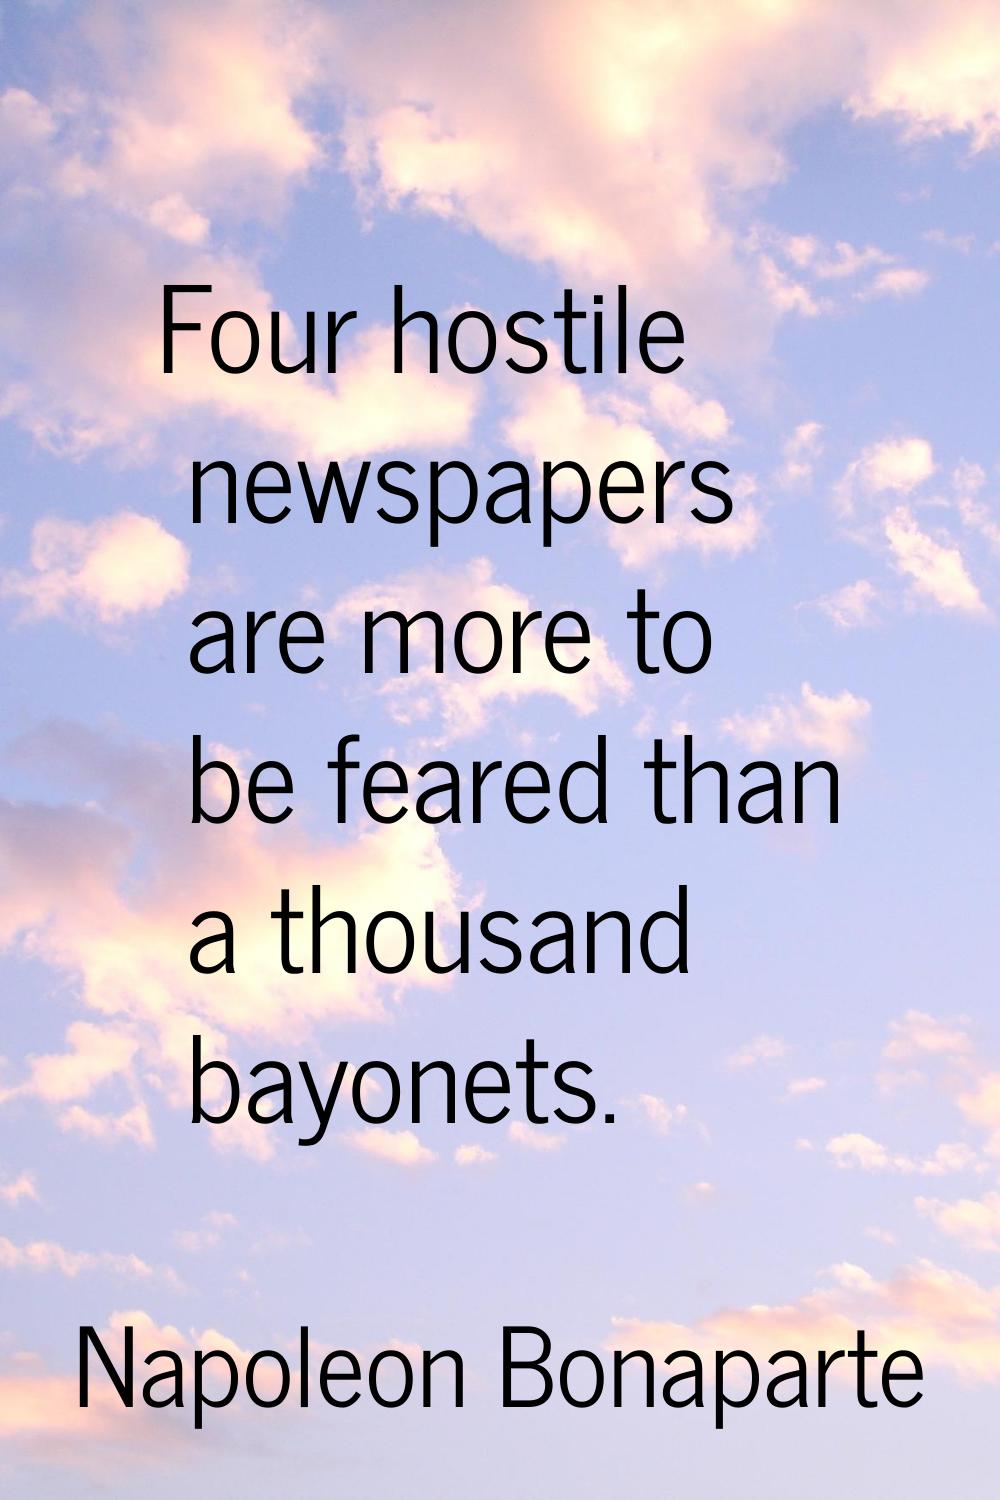 Four hostile newspapers are more to be feared than a thousand bayonets.